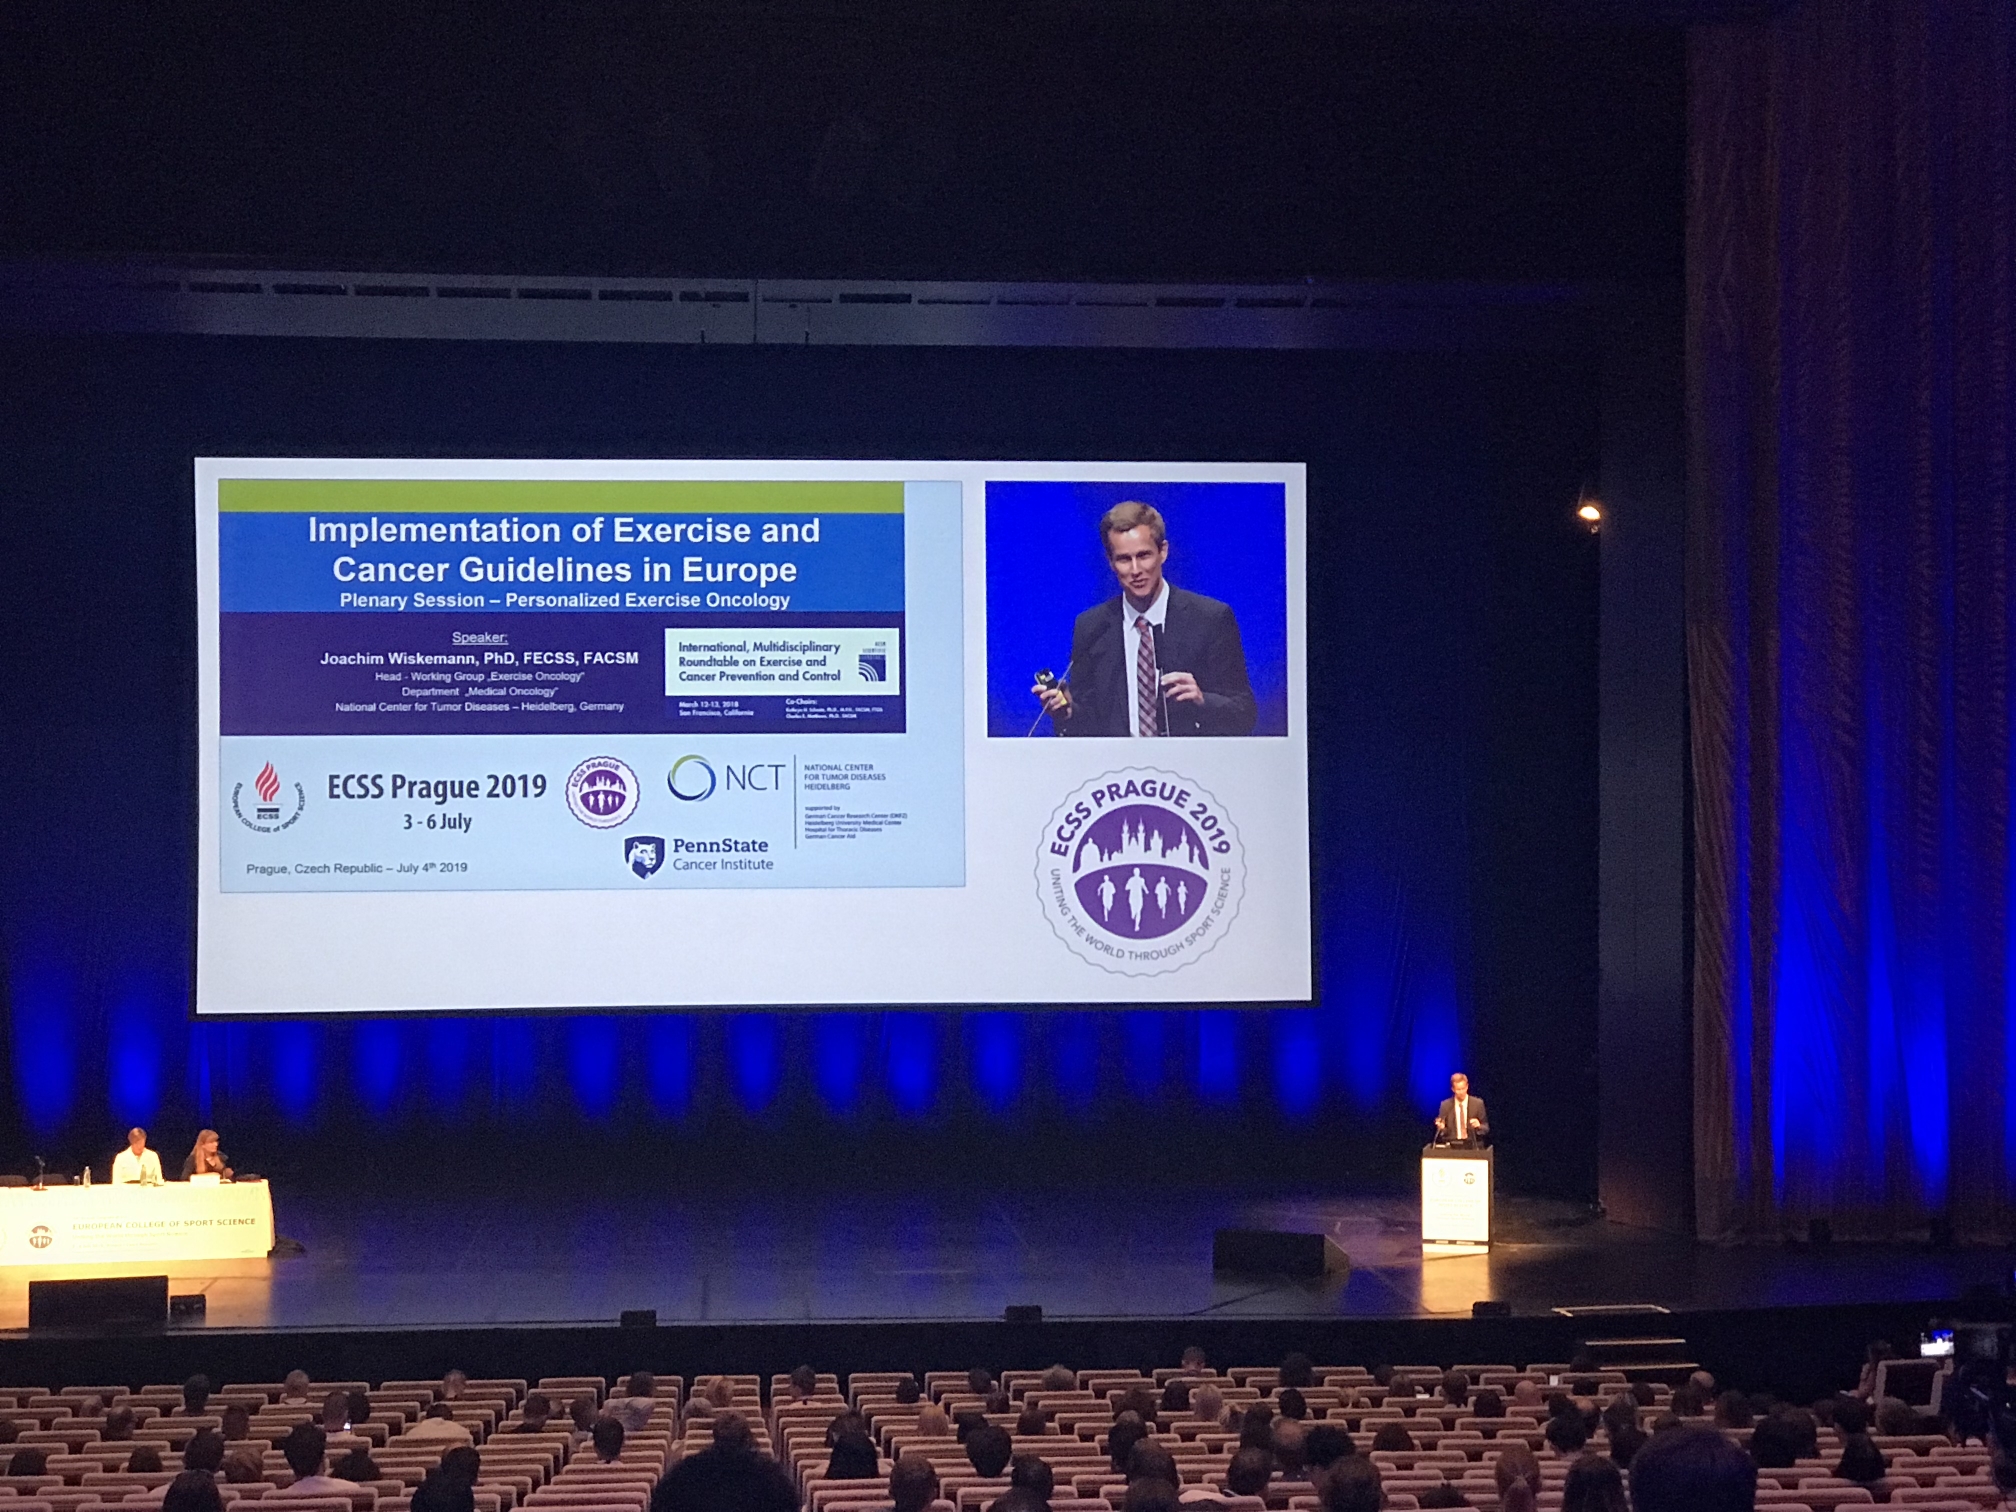 Implementation of Exercise and Cancer Guidelines at the ECSS 2019